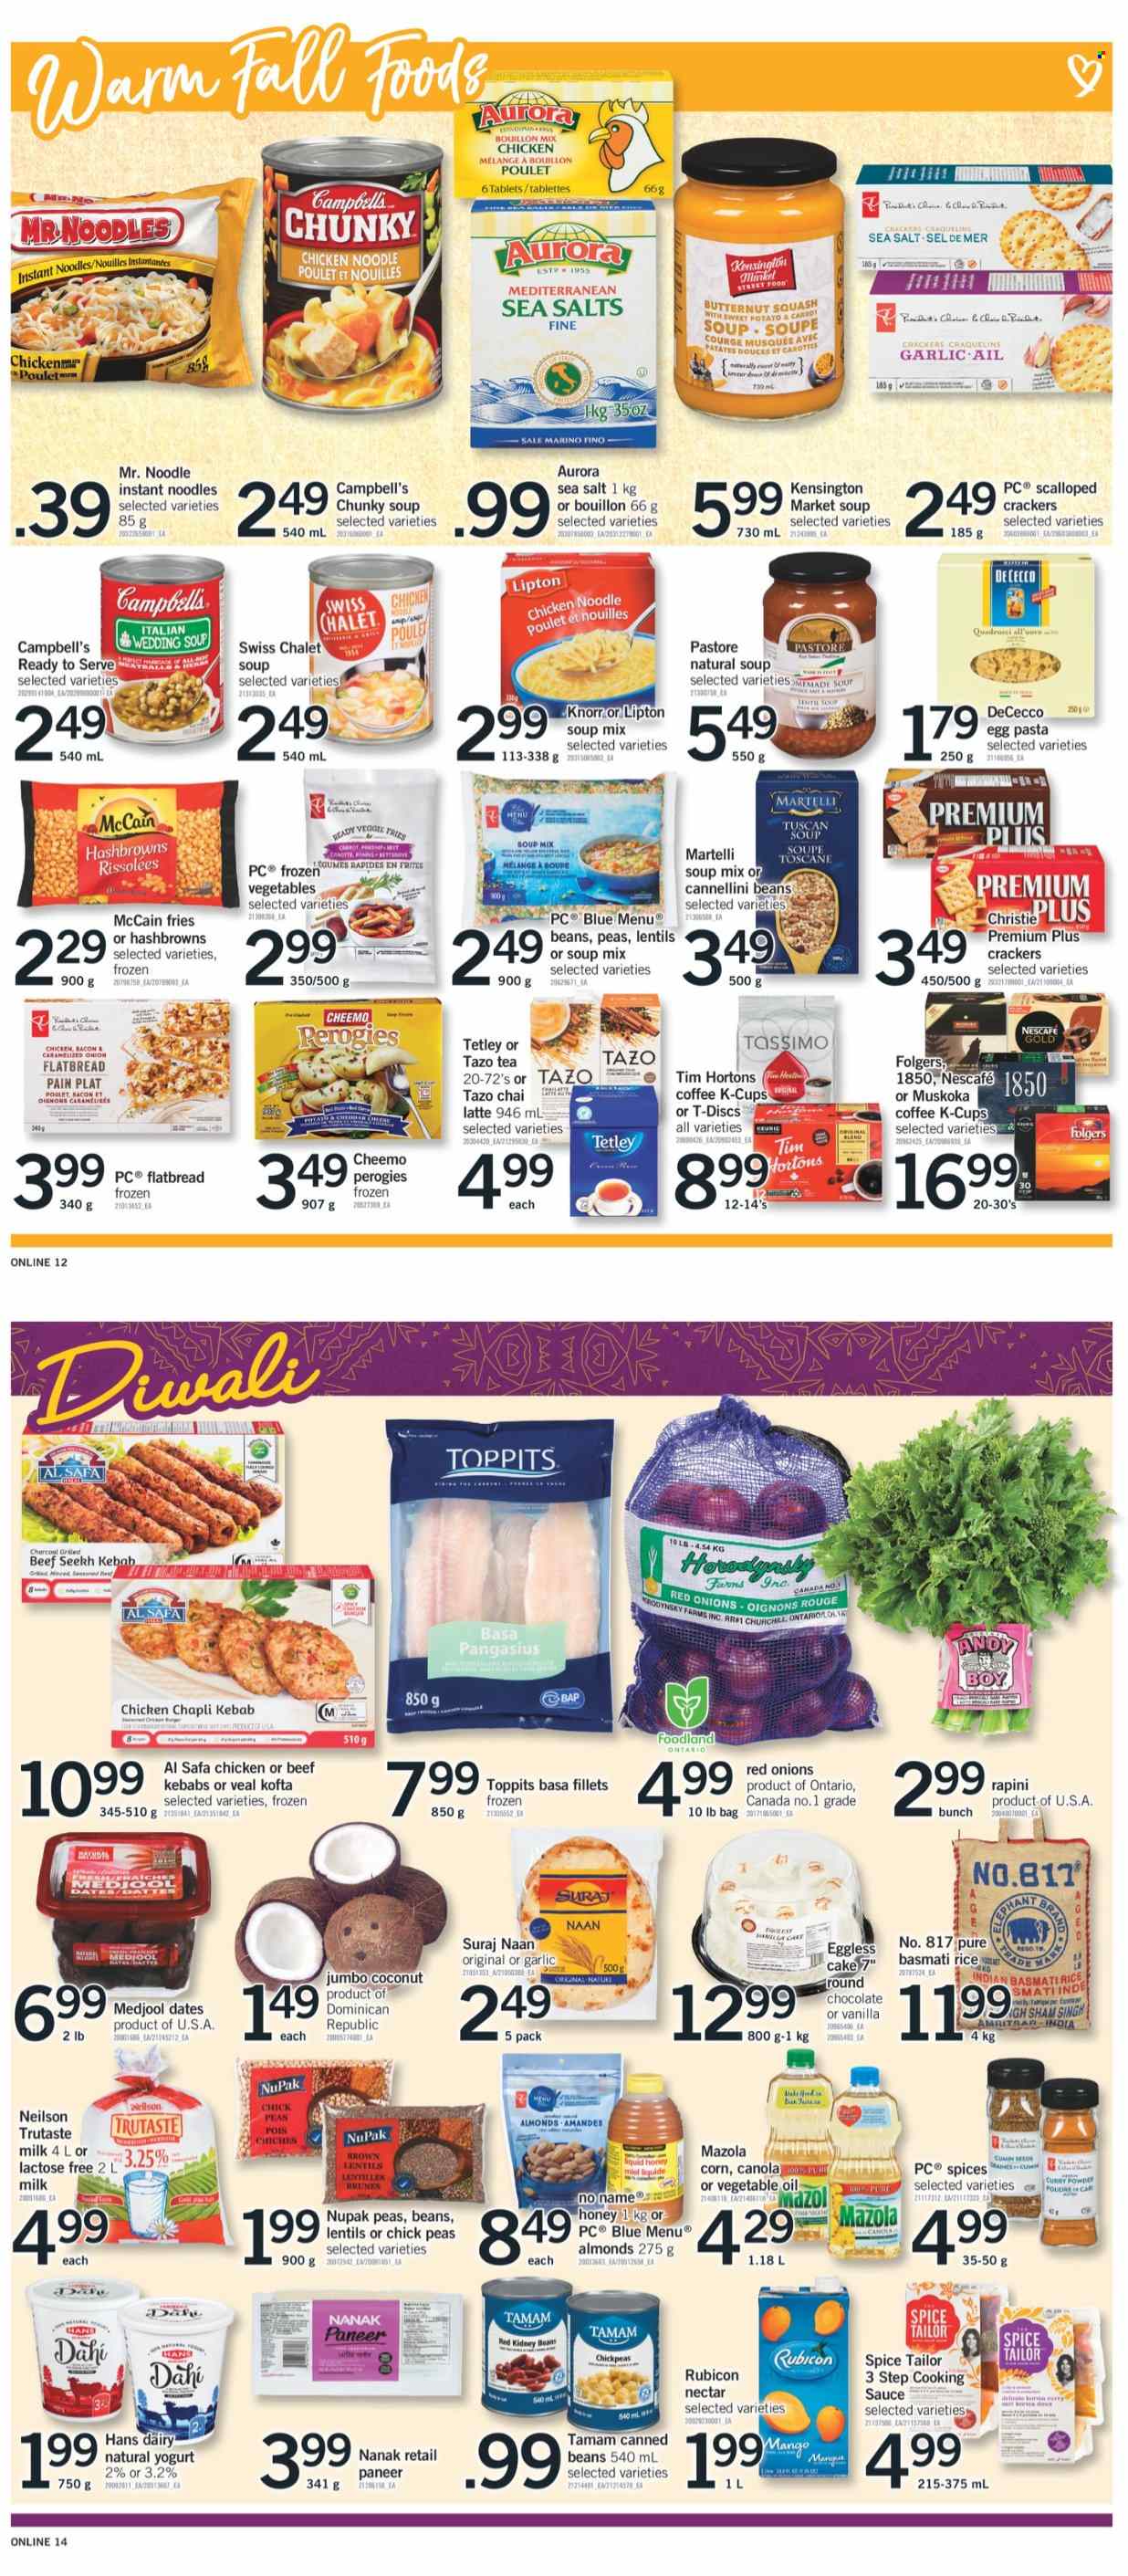 thumbnail - Fortinos Flyer - October 14, 2021 - October 20, 2021 - Sales products - cake, flatbread, butternut squash, corn, garlic, red onions, coconut, pangasius, No Name, Campbell's, soup mix, soup, pasta, instant noodles, sauce, noodles, bacon, paneer, yoghurt, milk, frozen vegetables, McCain, hash browns, potato fries, chocolate, crackers, bouillon, cannellini beans, lentils, kidney beans, basmati rice, rice, chickpeas, spice, curry powder, oil, honey, almonds, dried dates, tea, coffee, Folgers, coffee capsules, K-Cups, charcoal, Knorr, Lipton, Nescafé. Page 7.